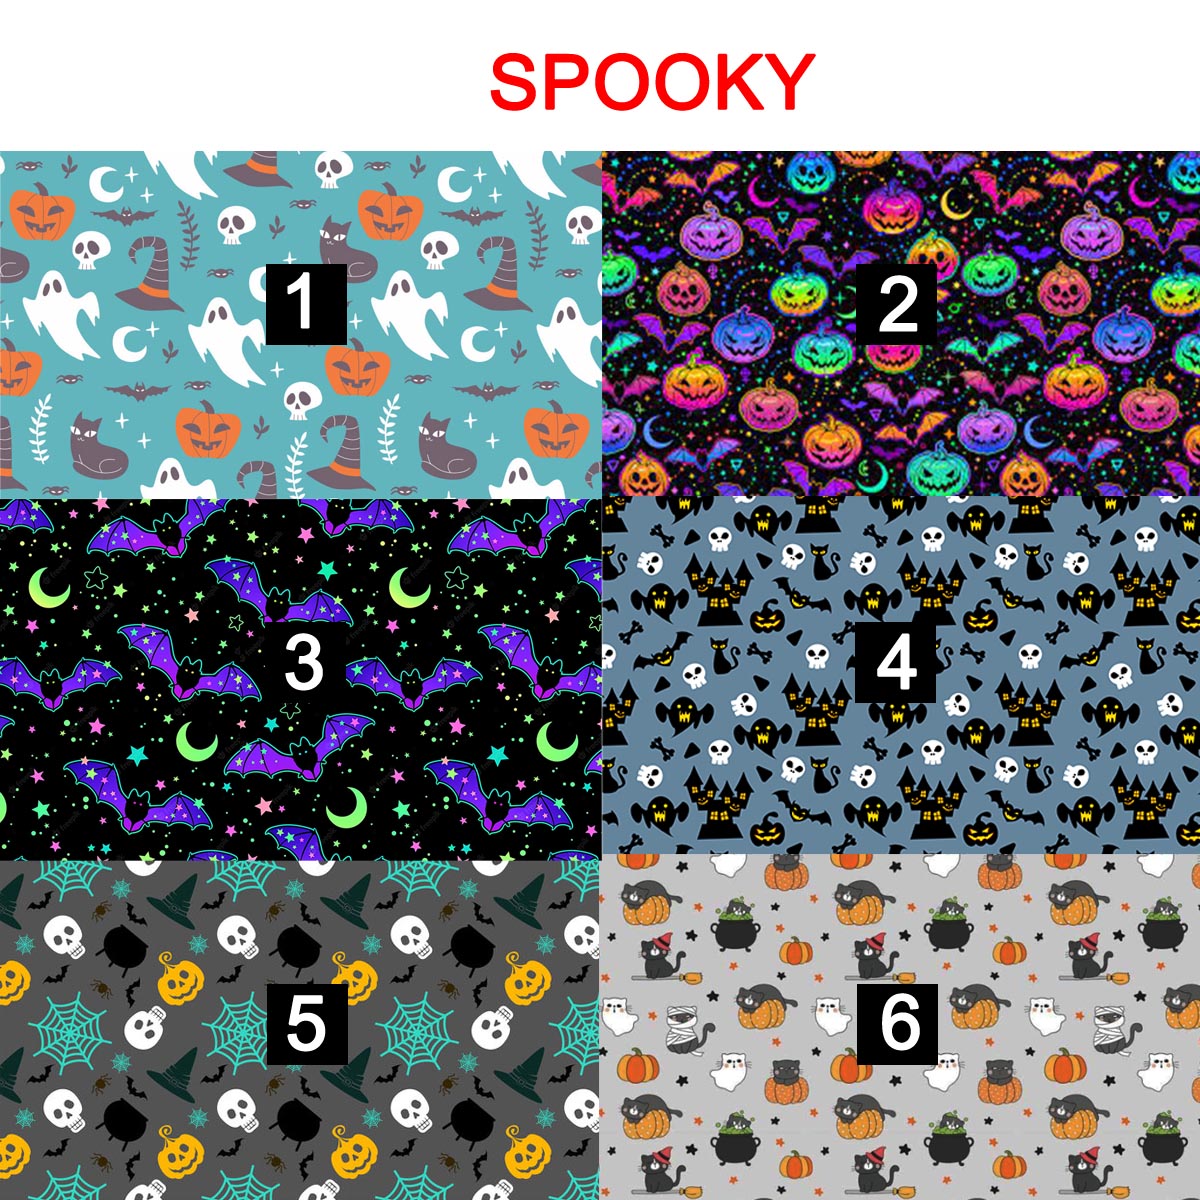 SPOOKY magnetic glasses topper - ghost, witch, mummy, halloween, trick or treat, october, pumpkin, ghost, spooky, black cat, fall leaves, acorn, autumn, seasons, pump, pumpkins